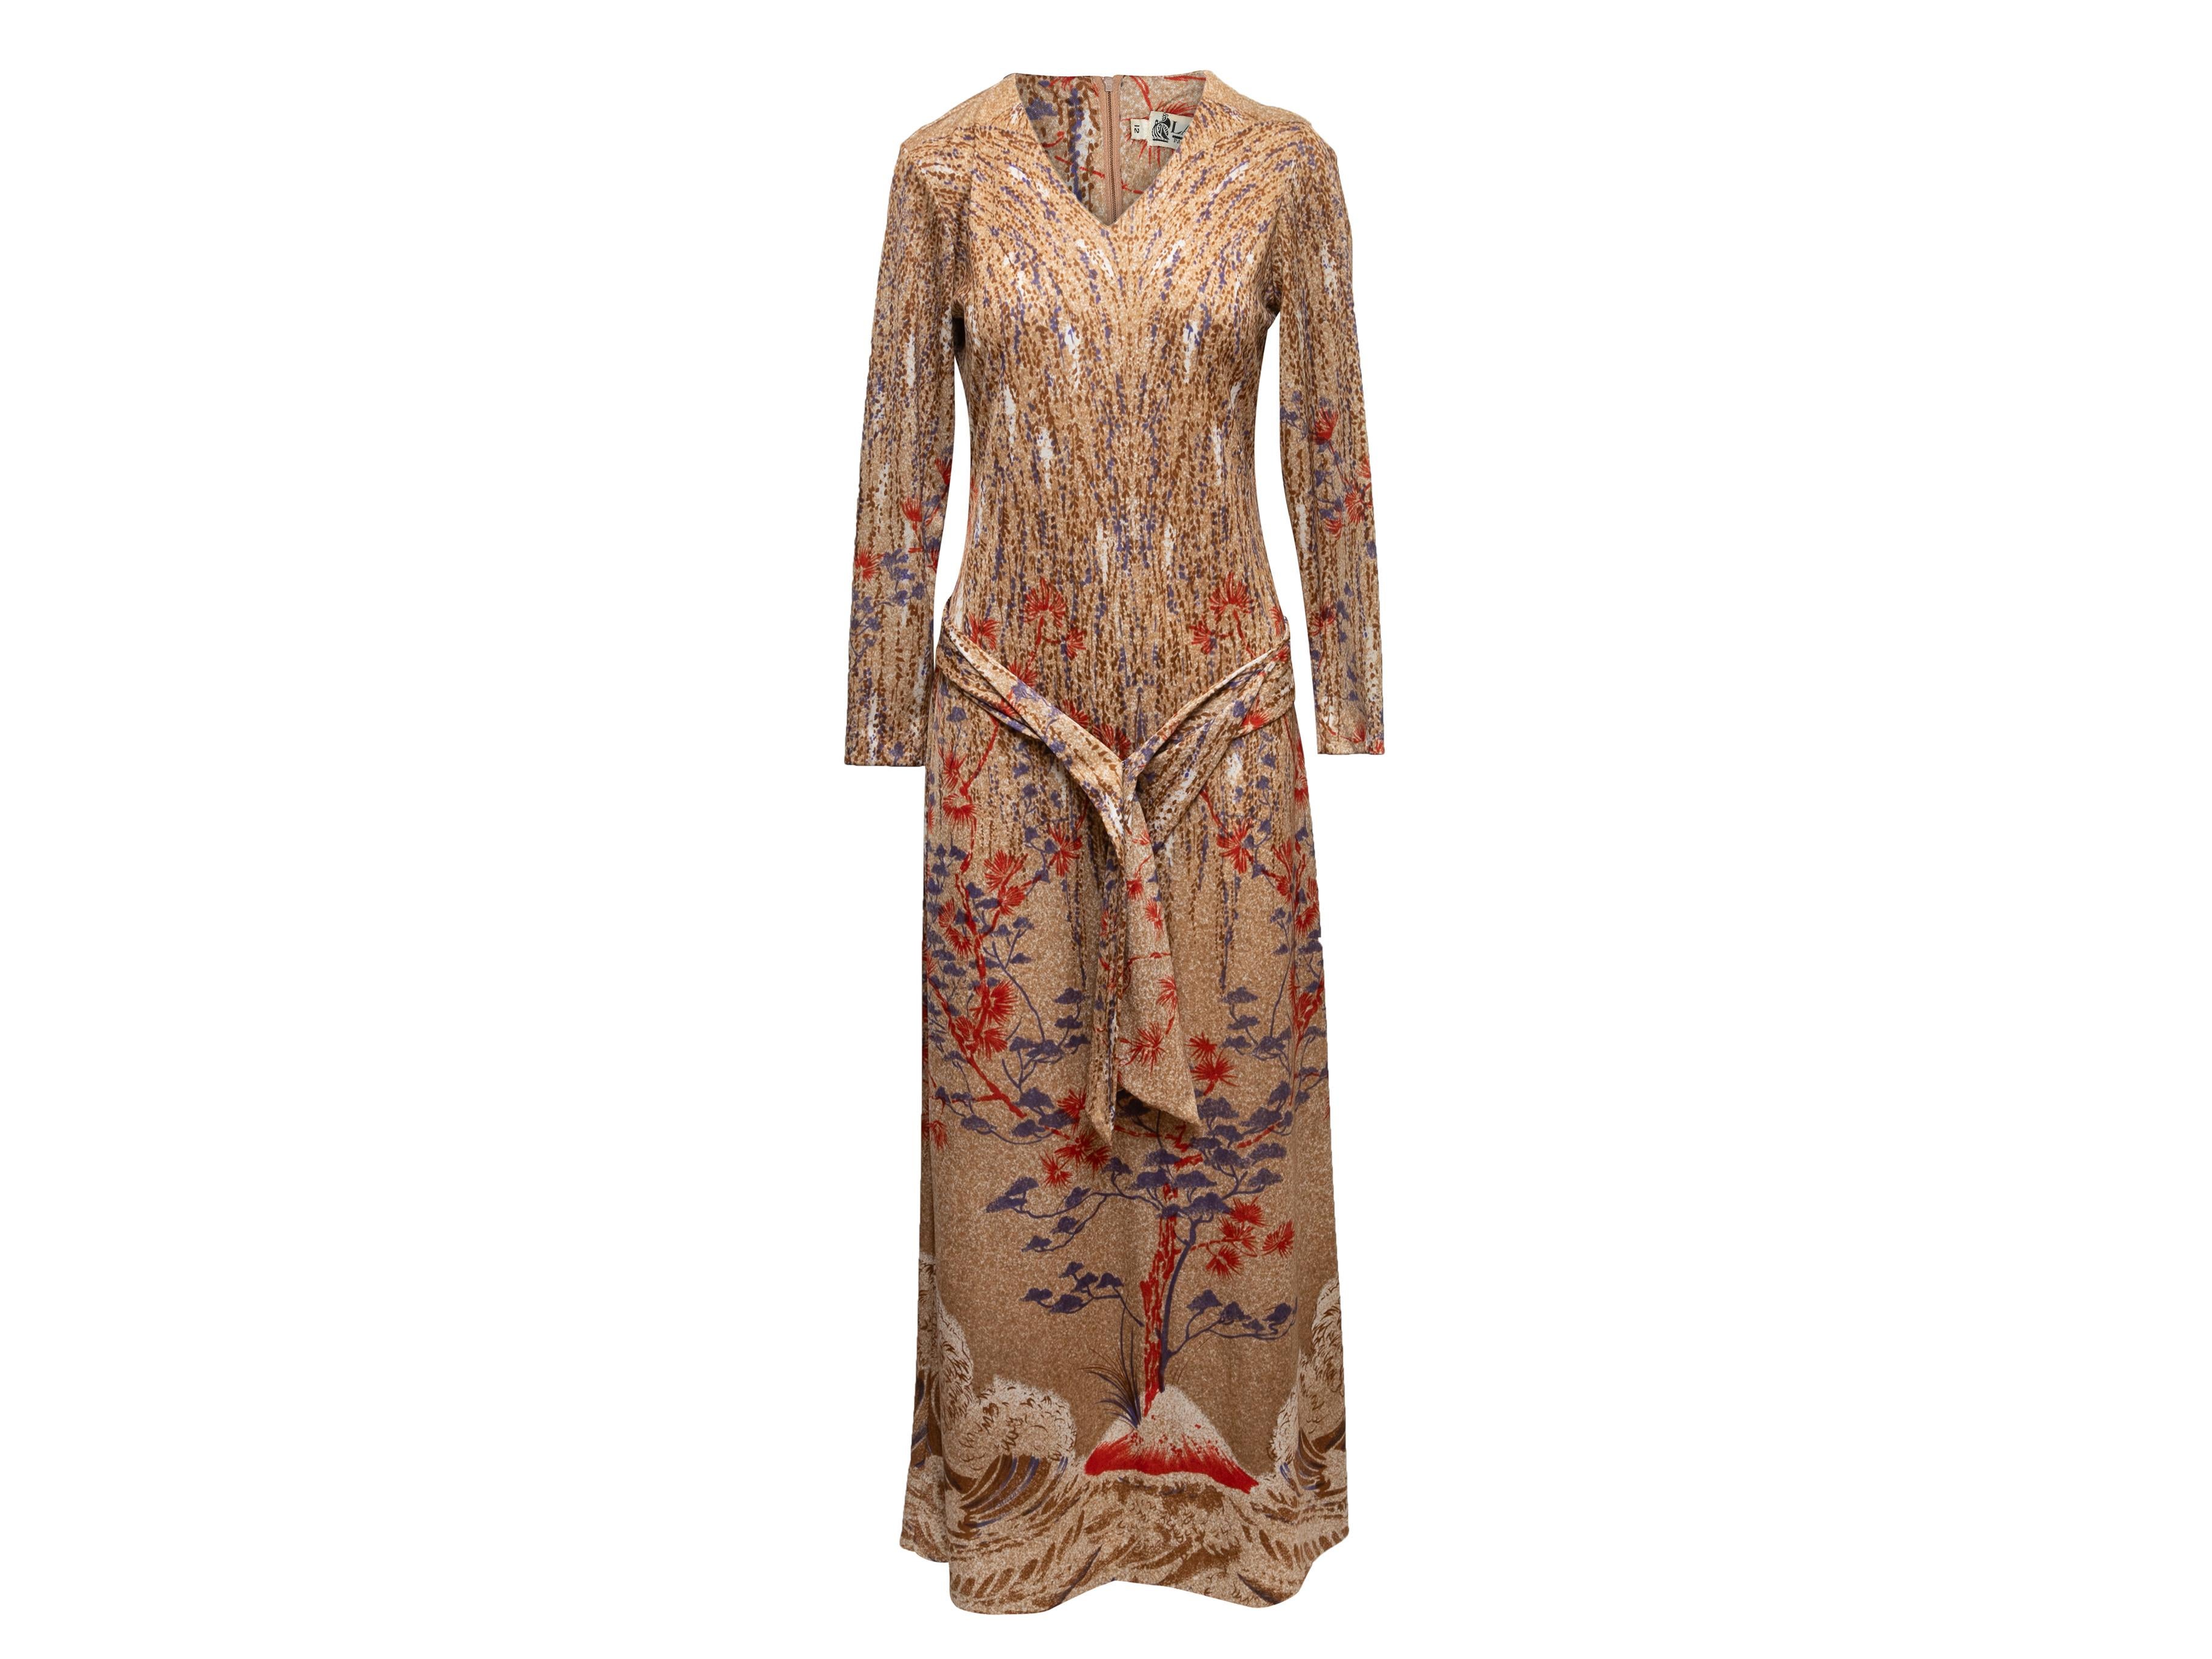 Vintage beige and multicolor tree print maxi dress by Lanvin. V-neck. Long sleeves. Zip closure at back. 36